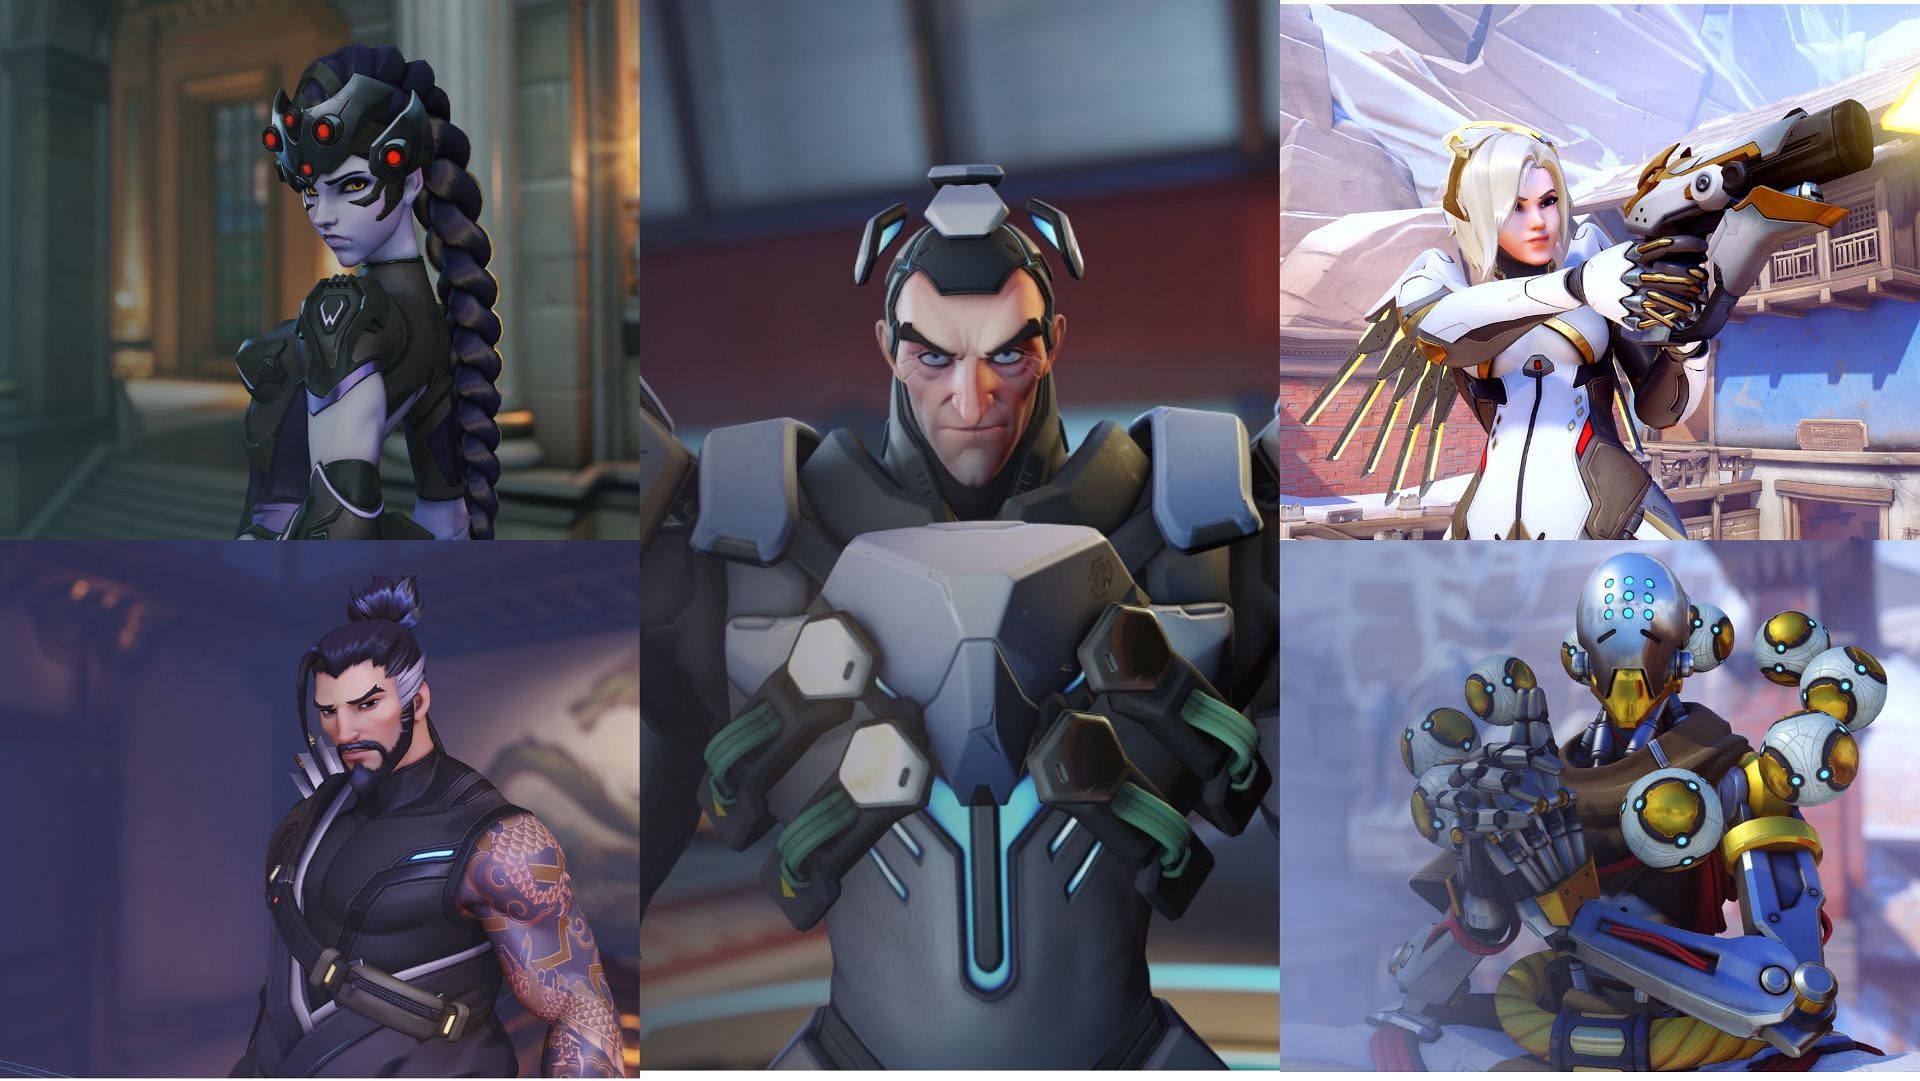 A powerful combination for defense in Hybrid Mode (Images via Blizzard Entertainment)